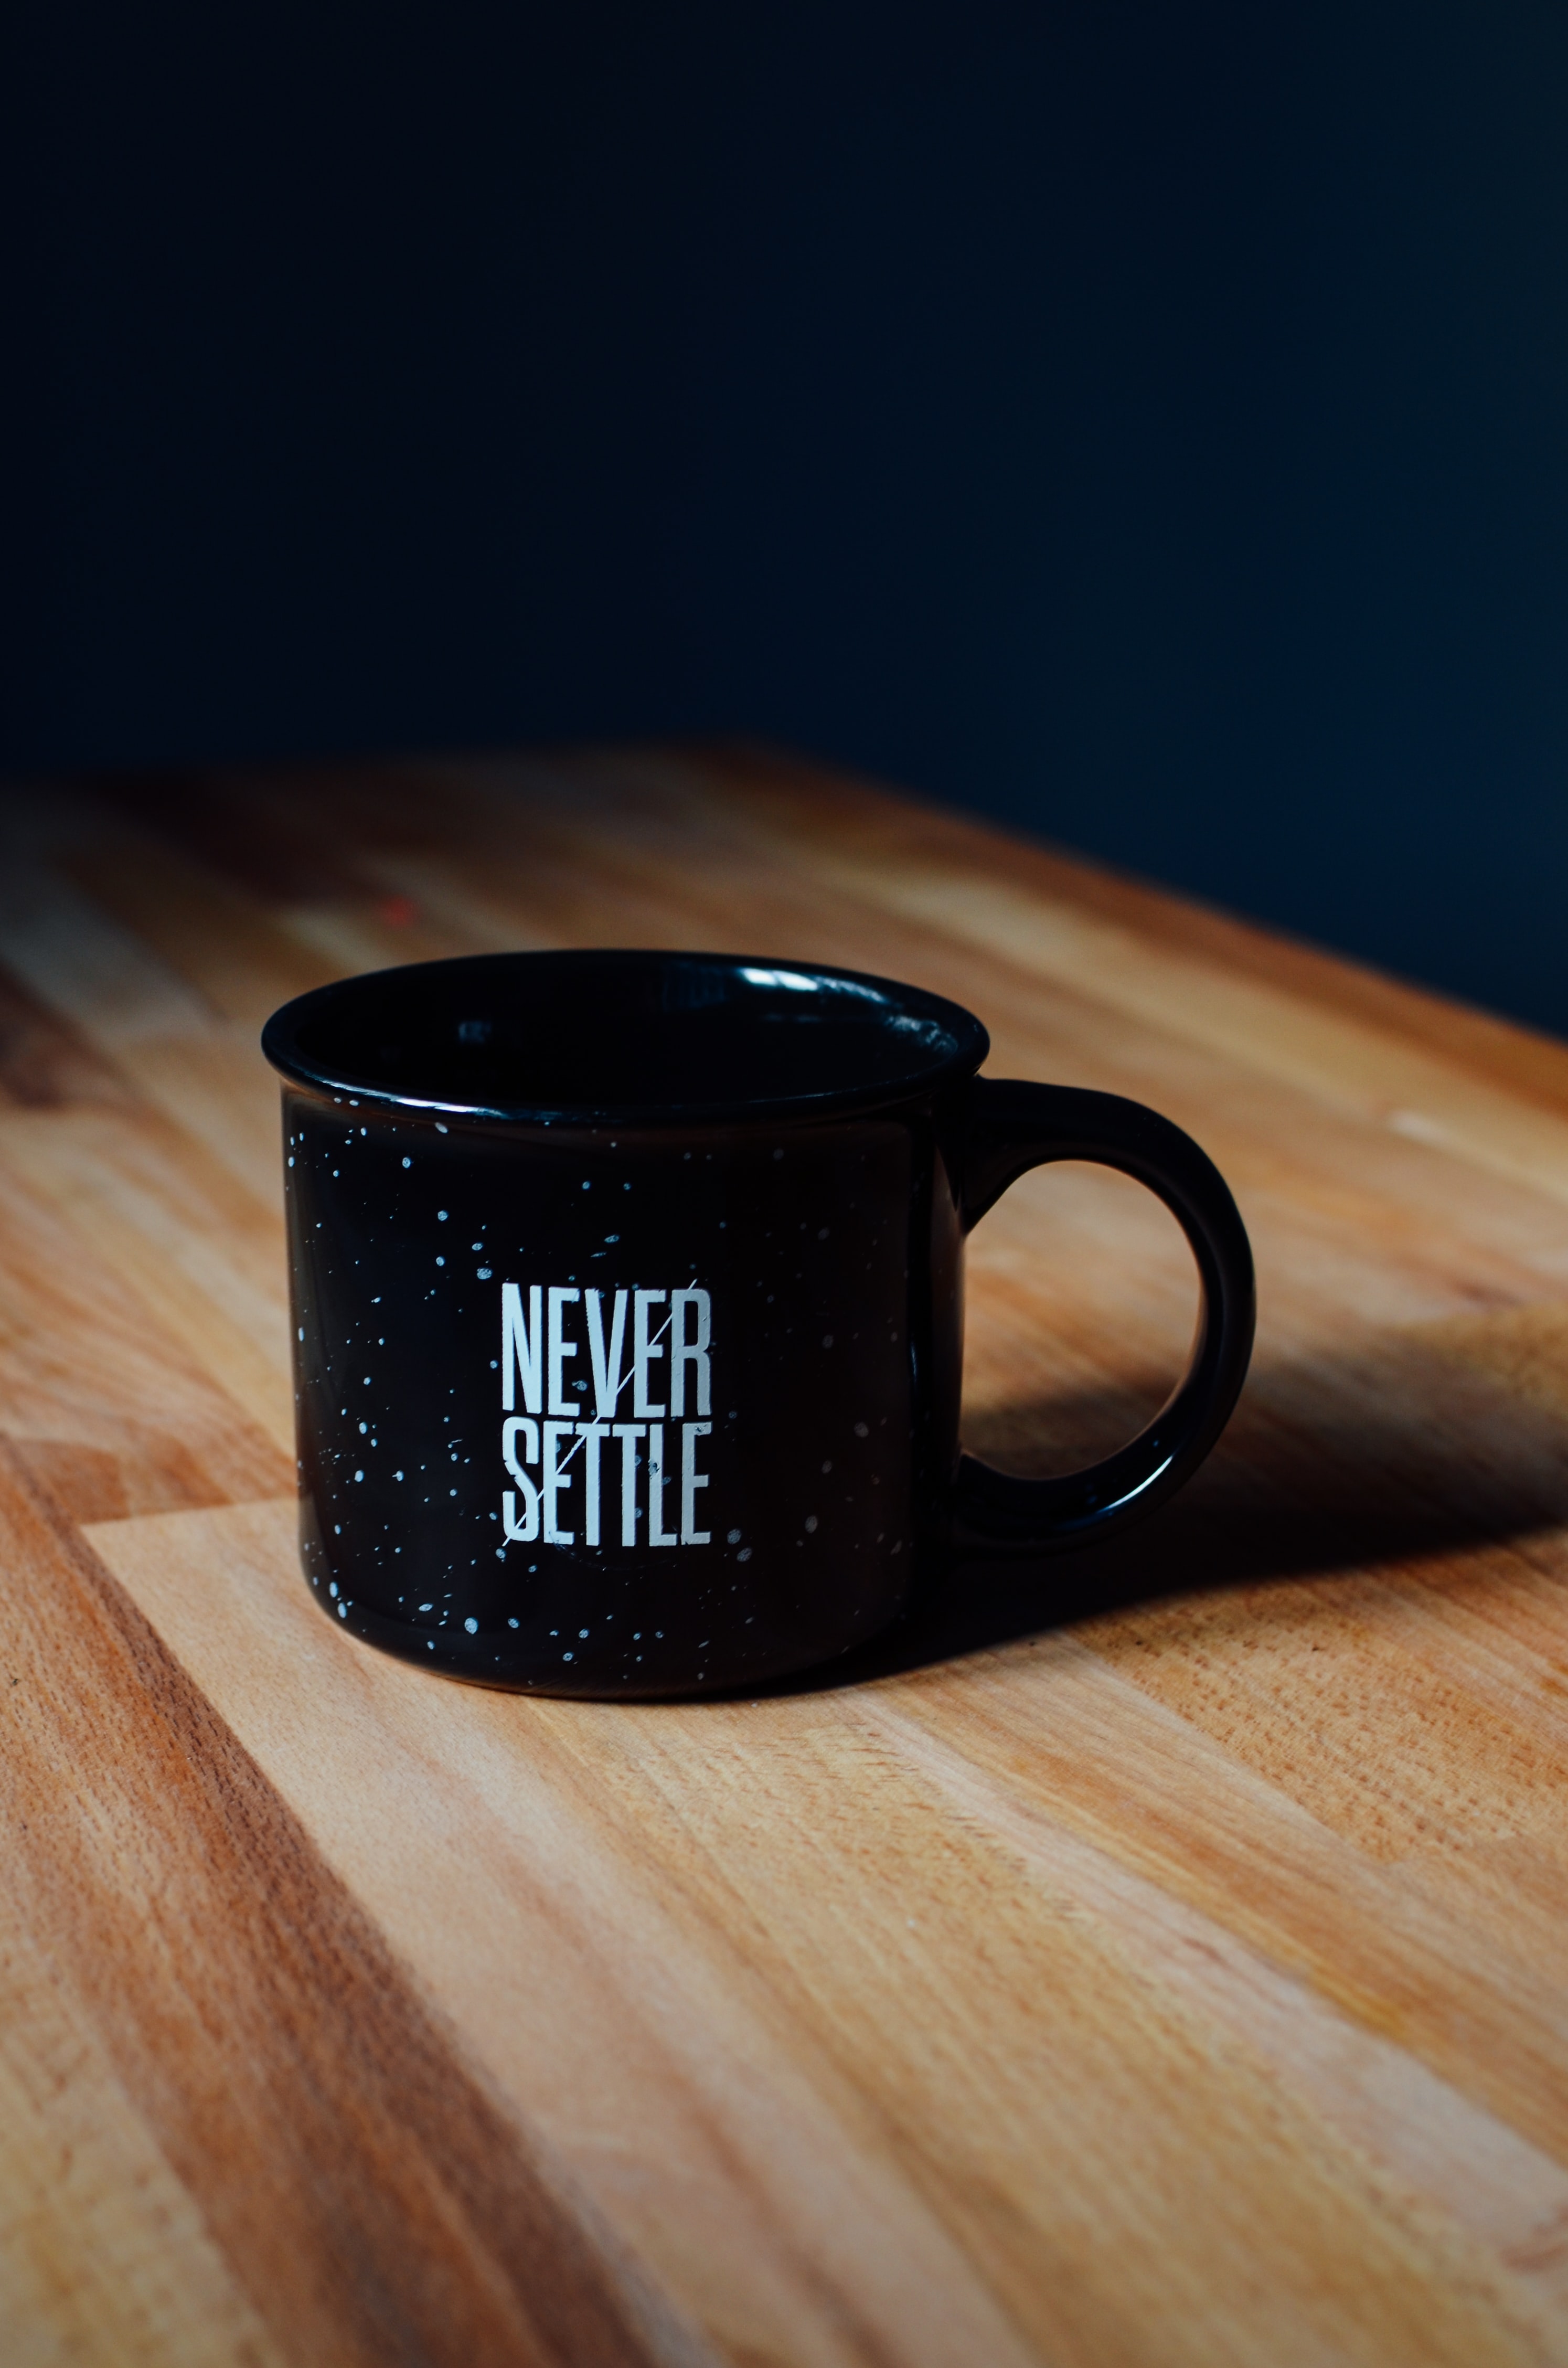 &quot;Never Settle&quot; typed on a coffee mug